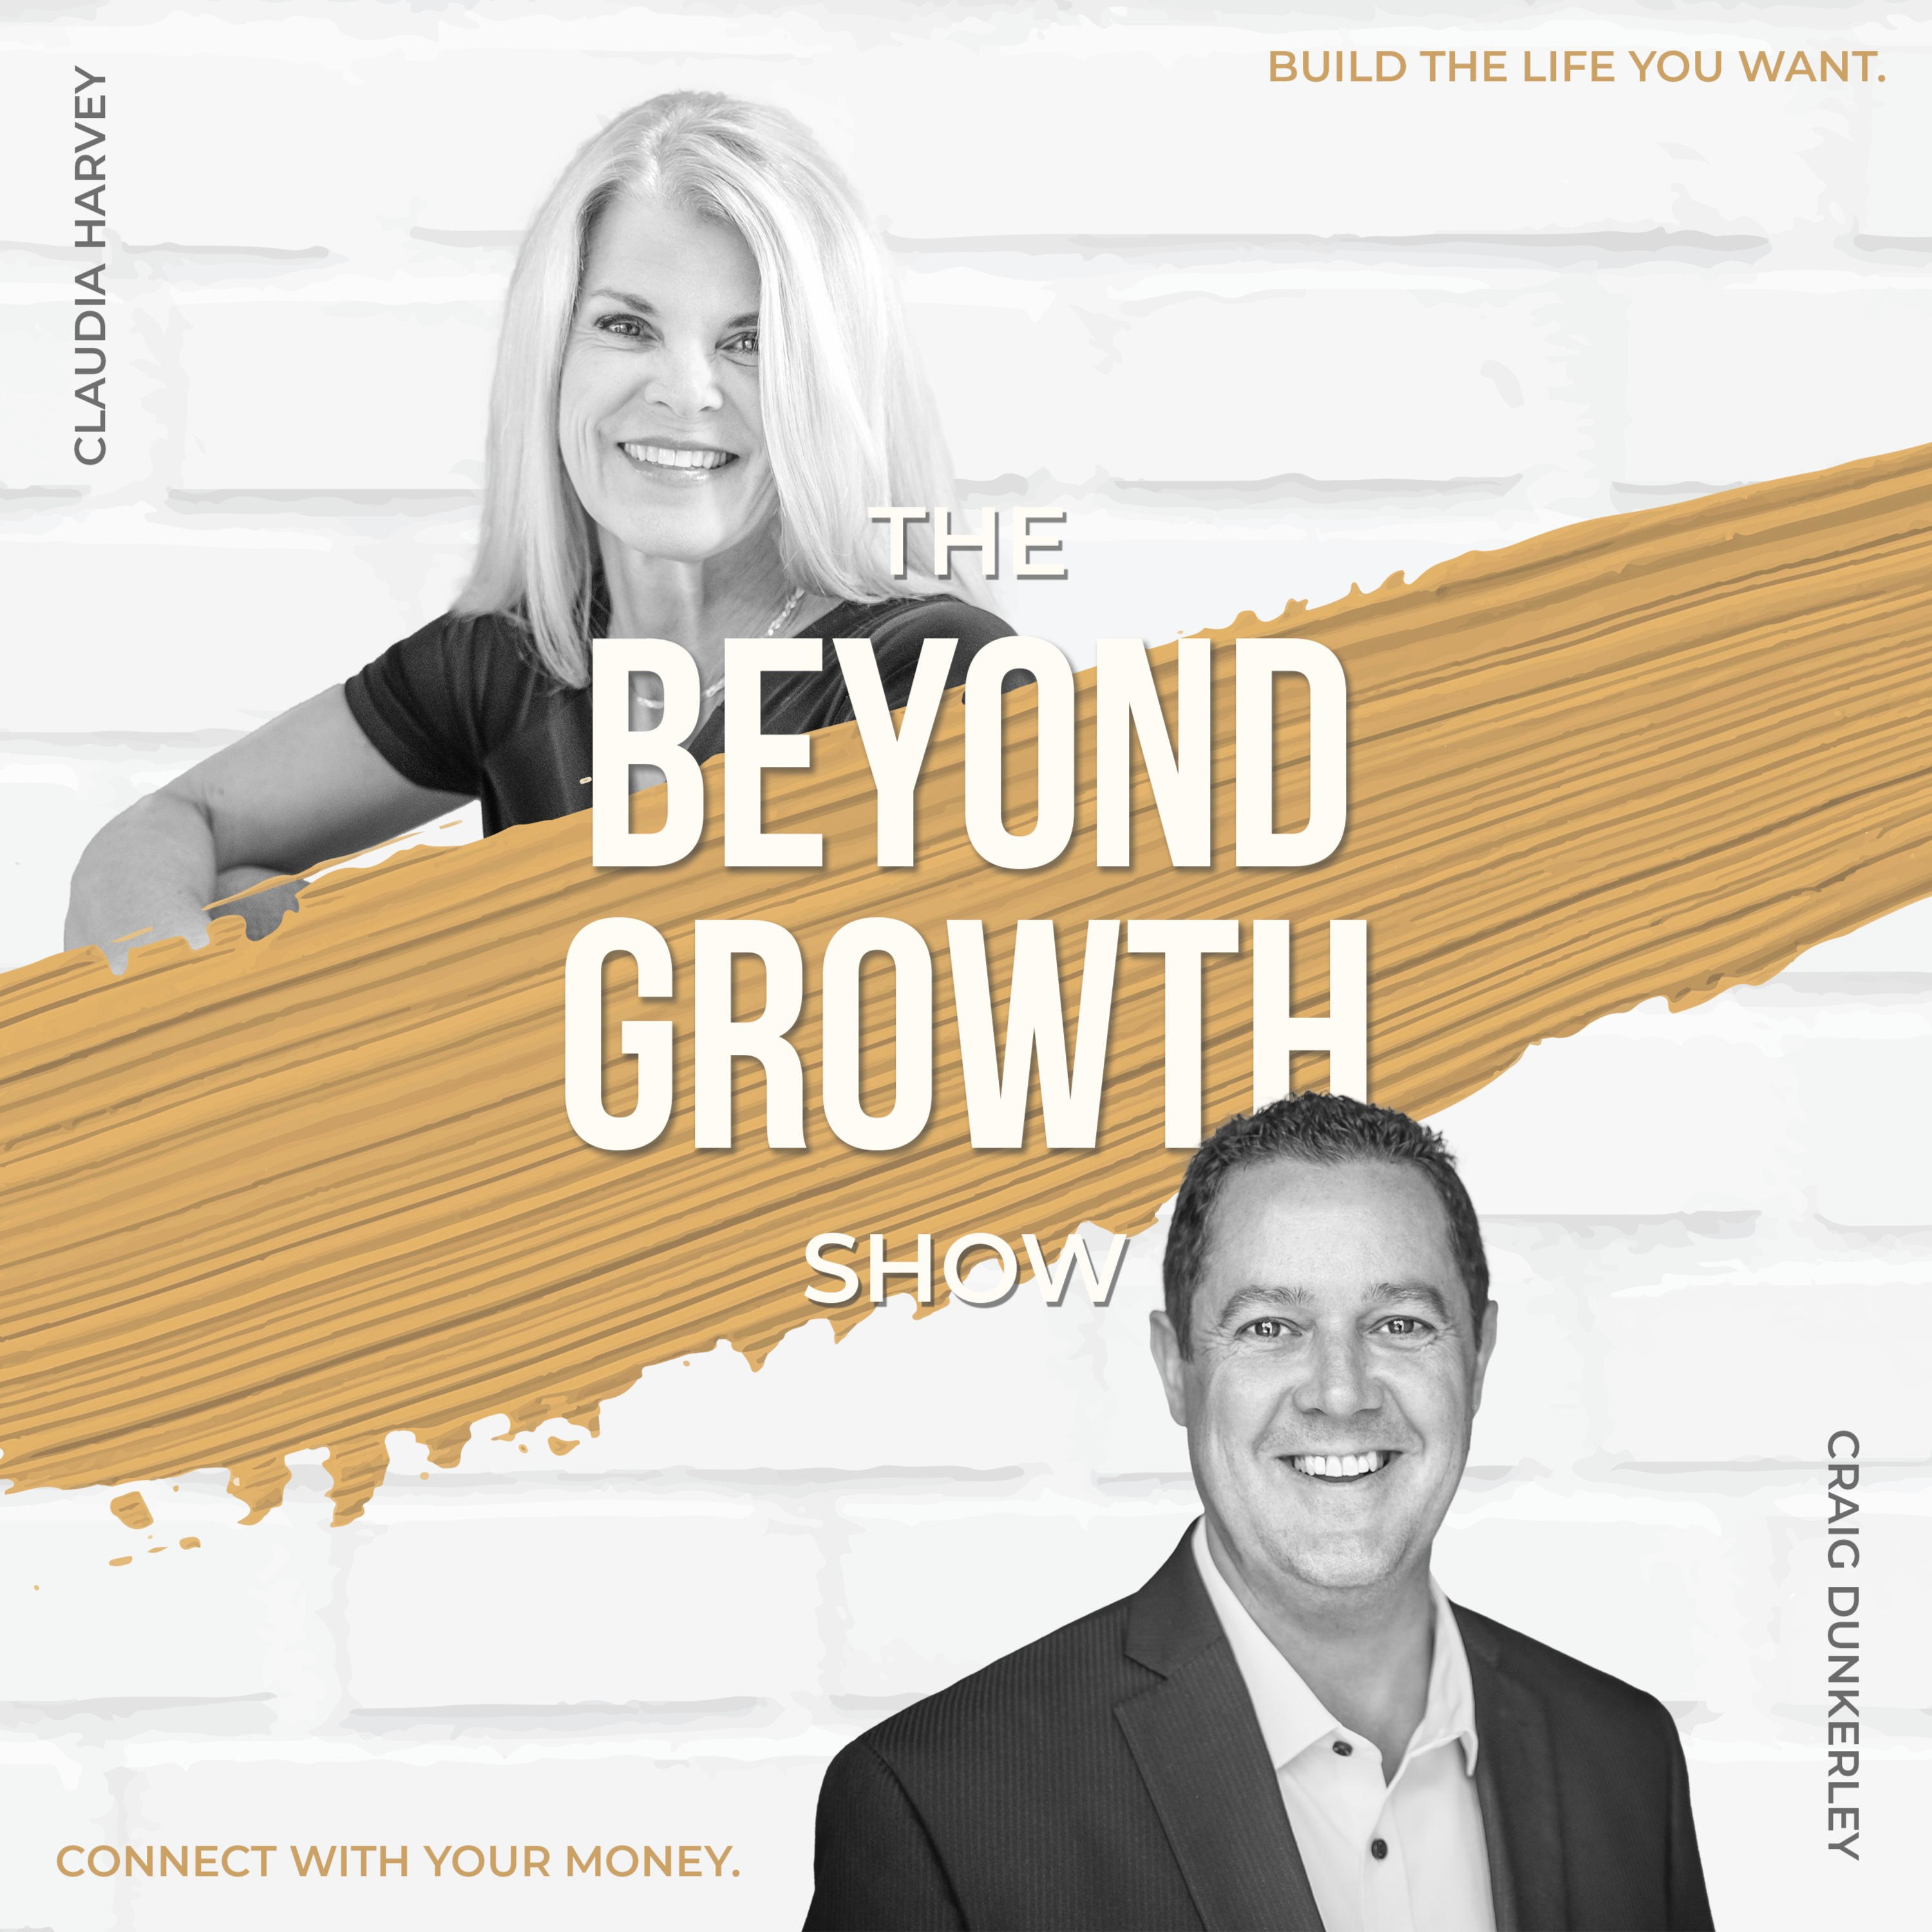 The Beyond Growth Show